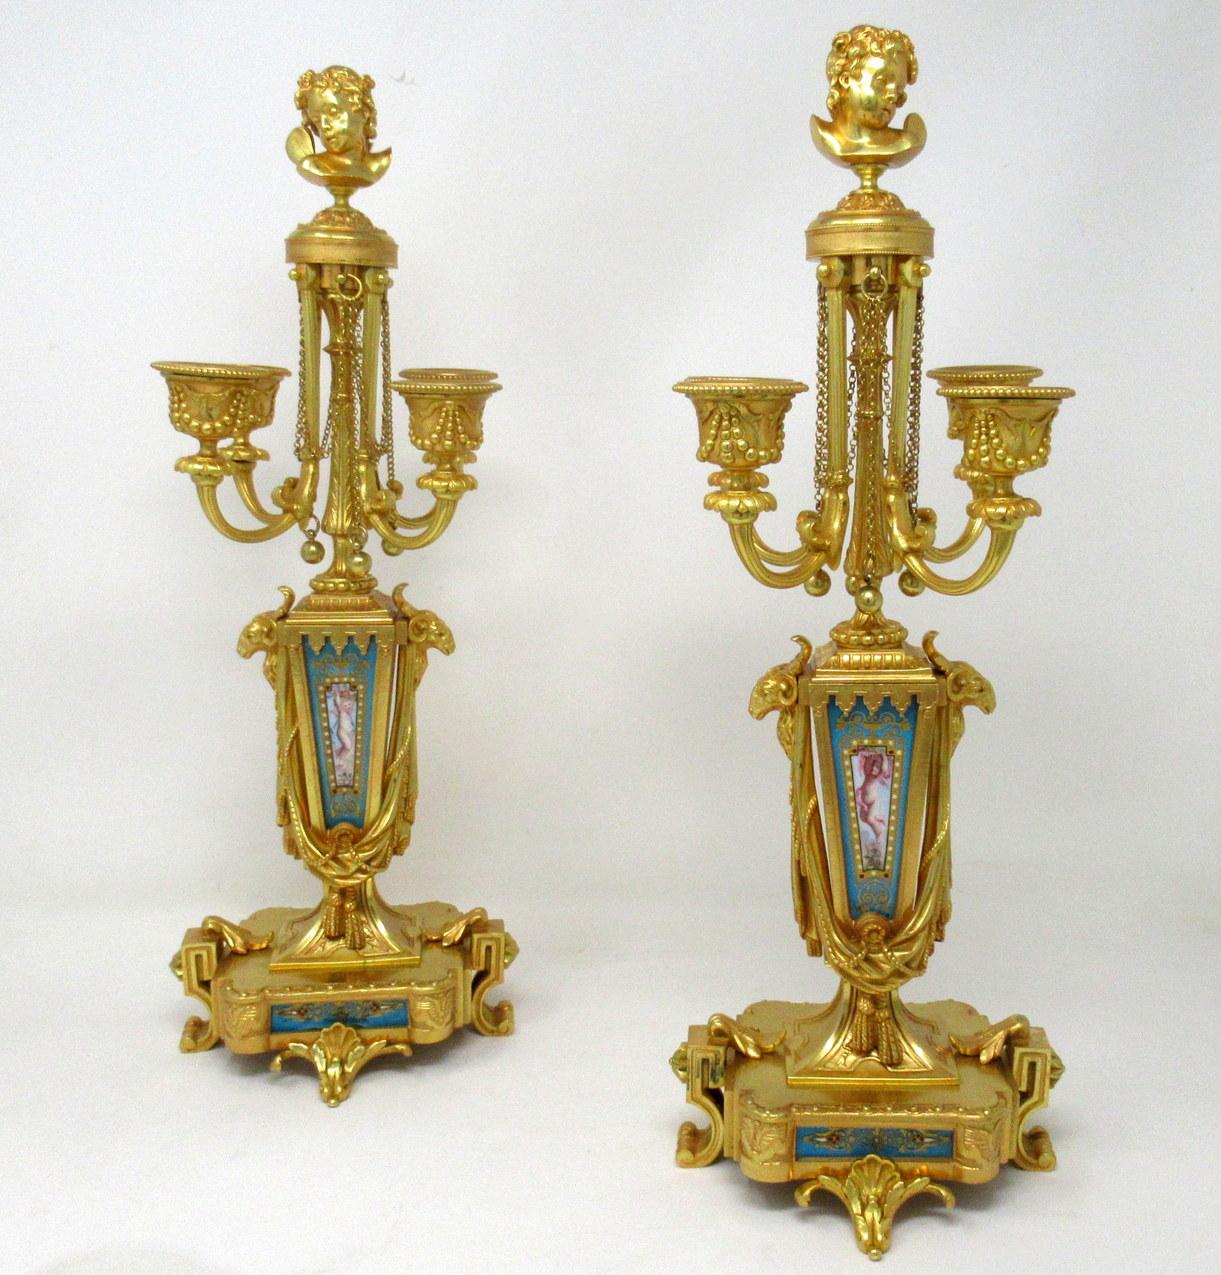 A fine pair of stylish and imposing French ormolu and hand decorated Sèvres panel four-arm table or mantel (fireplace) candelabras of exhibition quality, firmly attributed to Louis-Constant Sévin and cast by the Barbedienne Factory, mid to late 19th